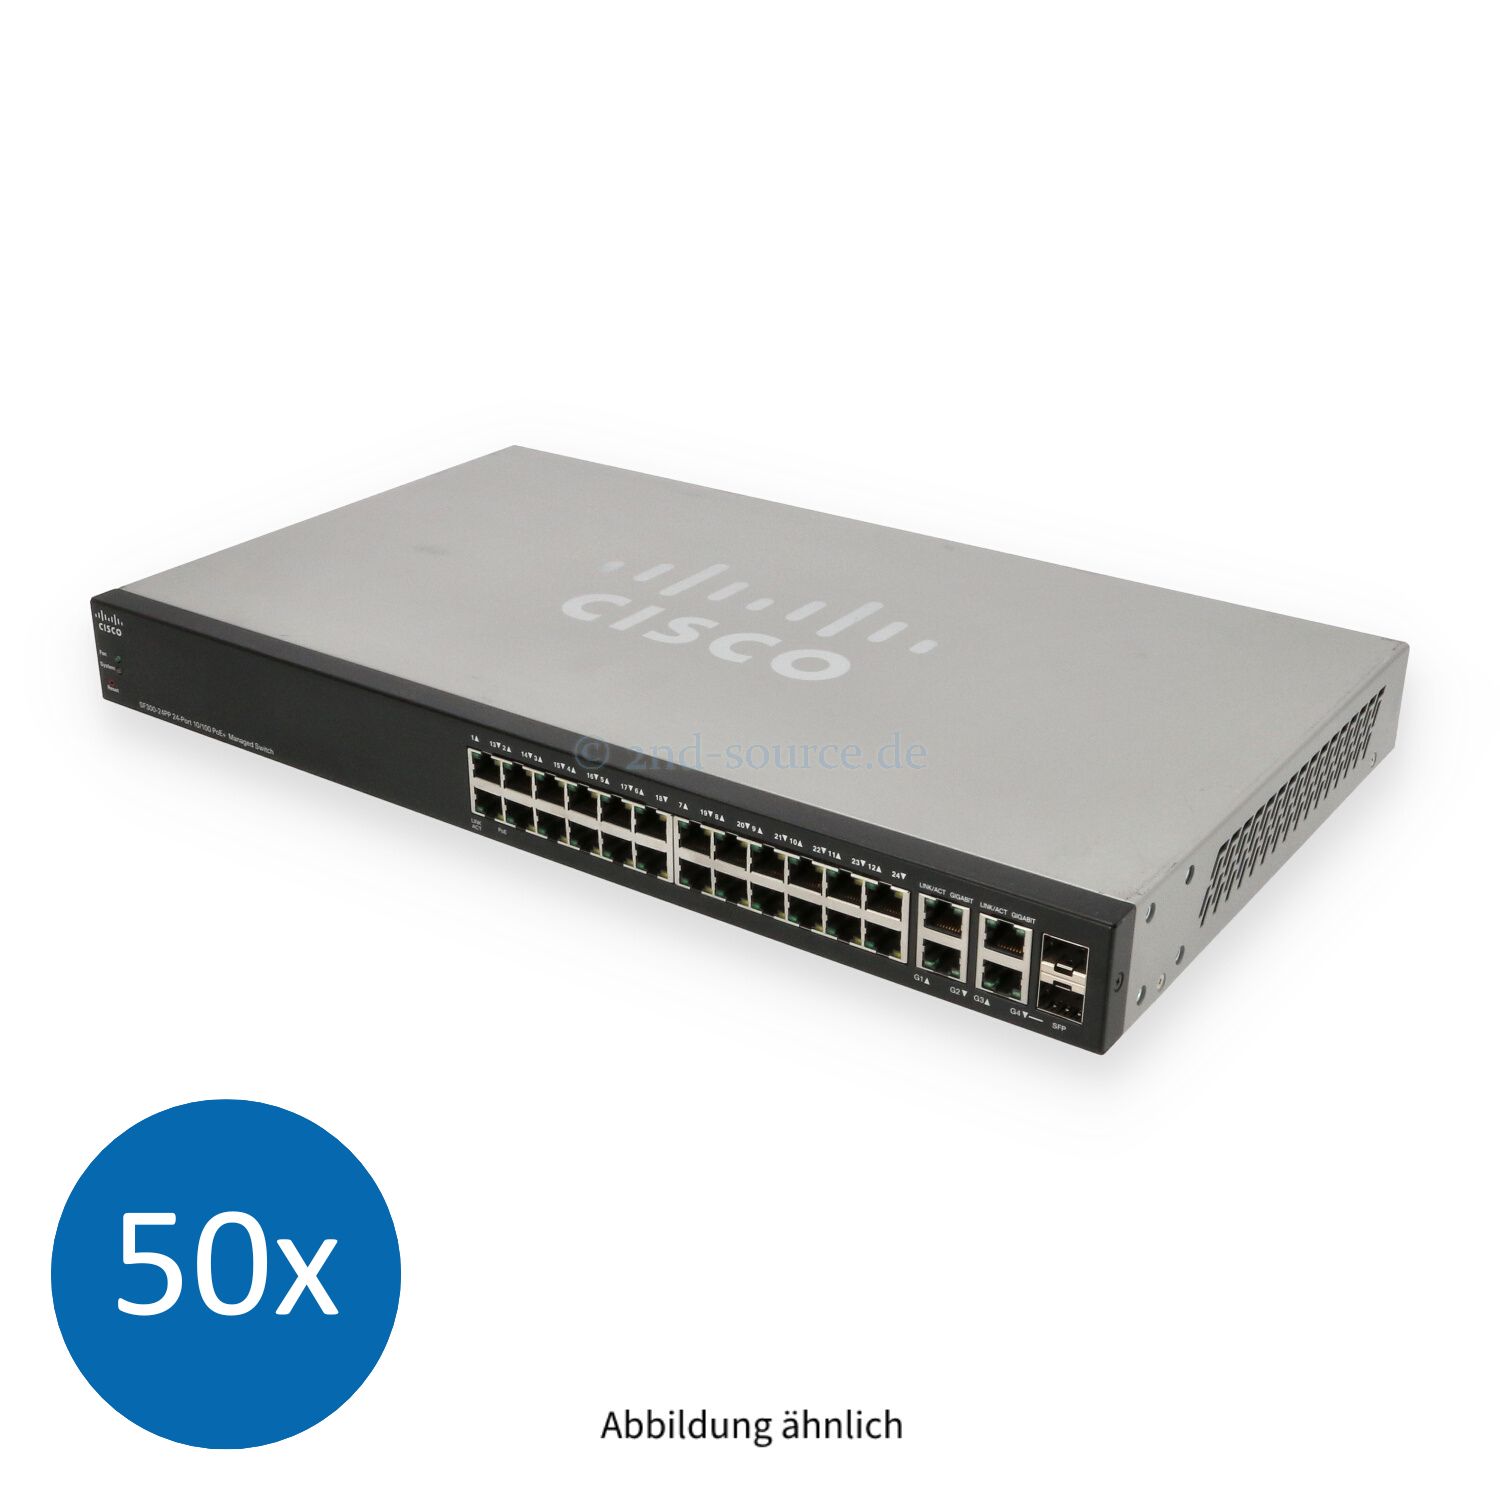 50x Cisco SF300-24PP 24x 10/100Base-T PoE+ 2x 1GbE 2x Shared SFP 1GbE Managed Switch SF300-24PP-K9